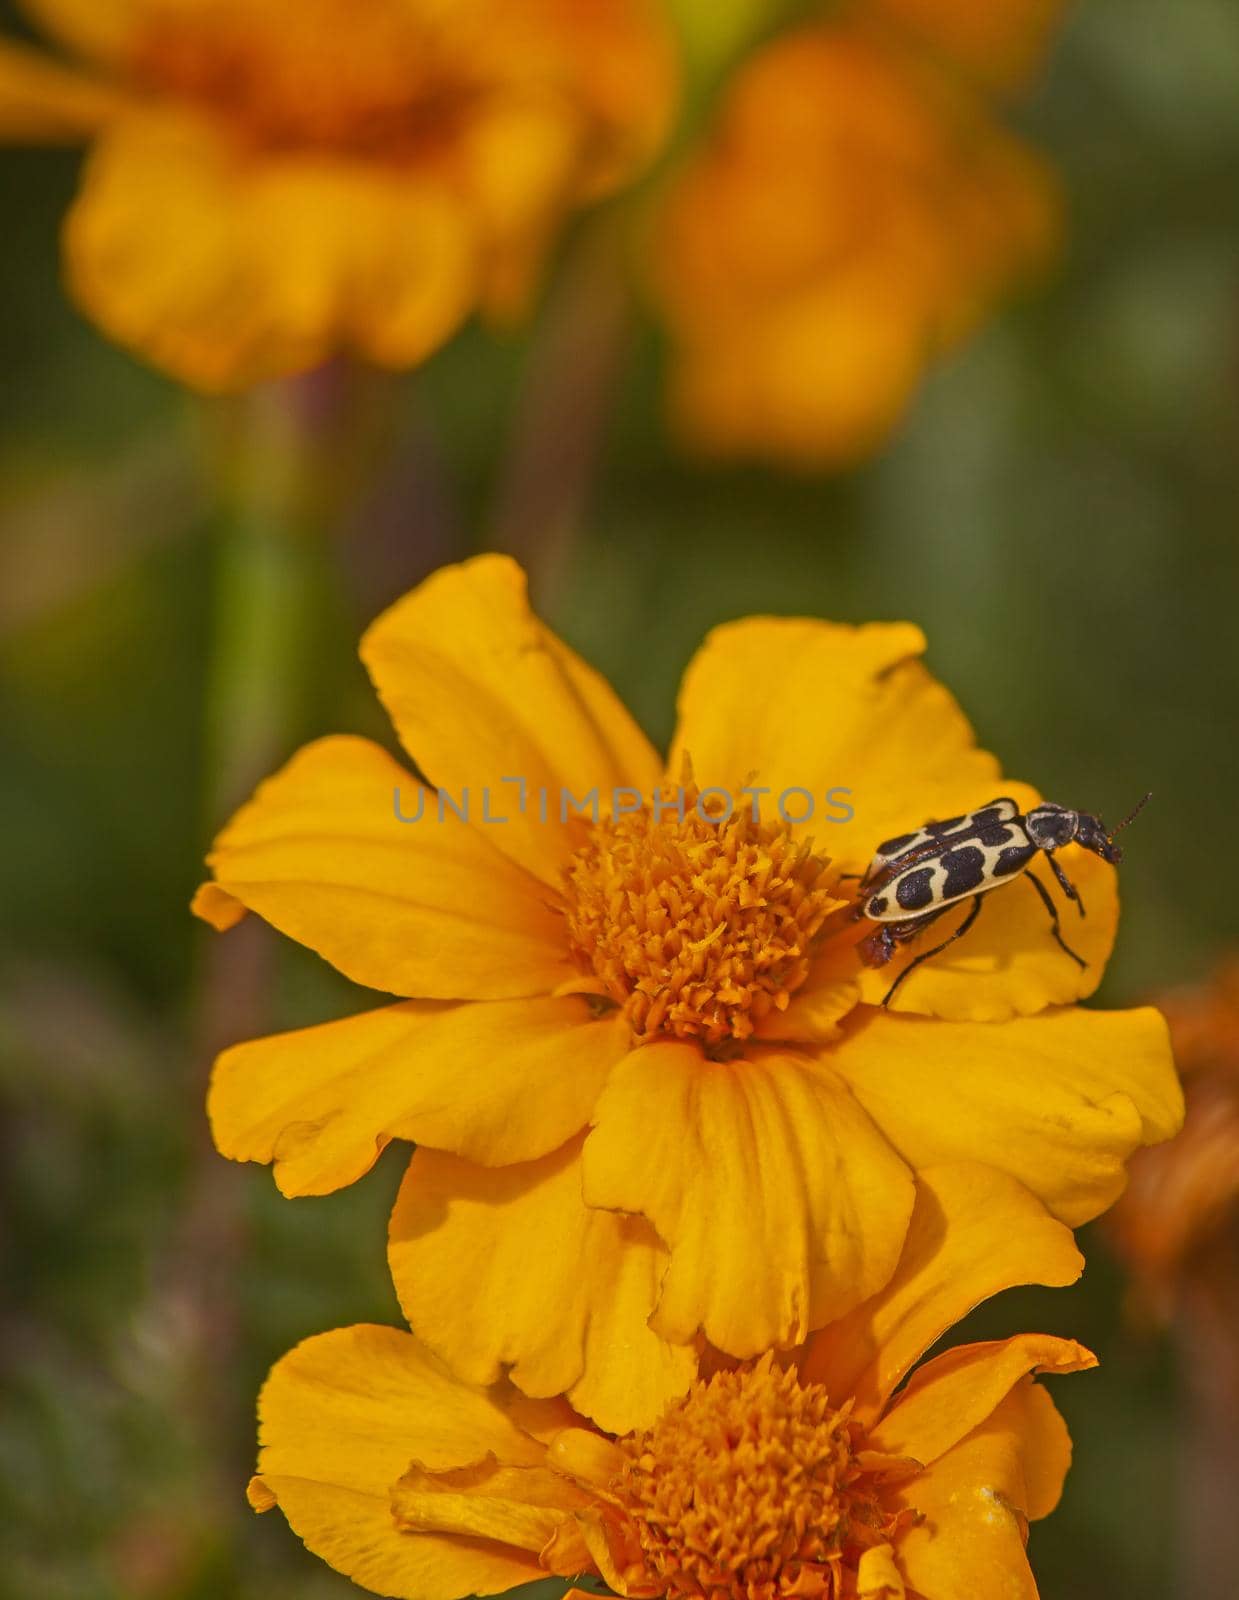 Yellow African Marigold (Tagetes patula) flowers with Spotted Maize Beetle (Astylus atroaculatus)